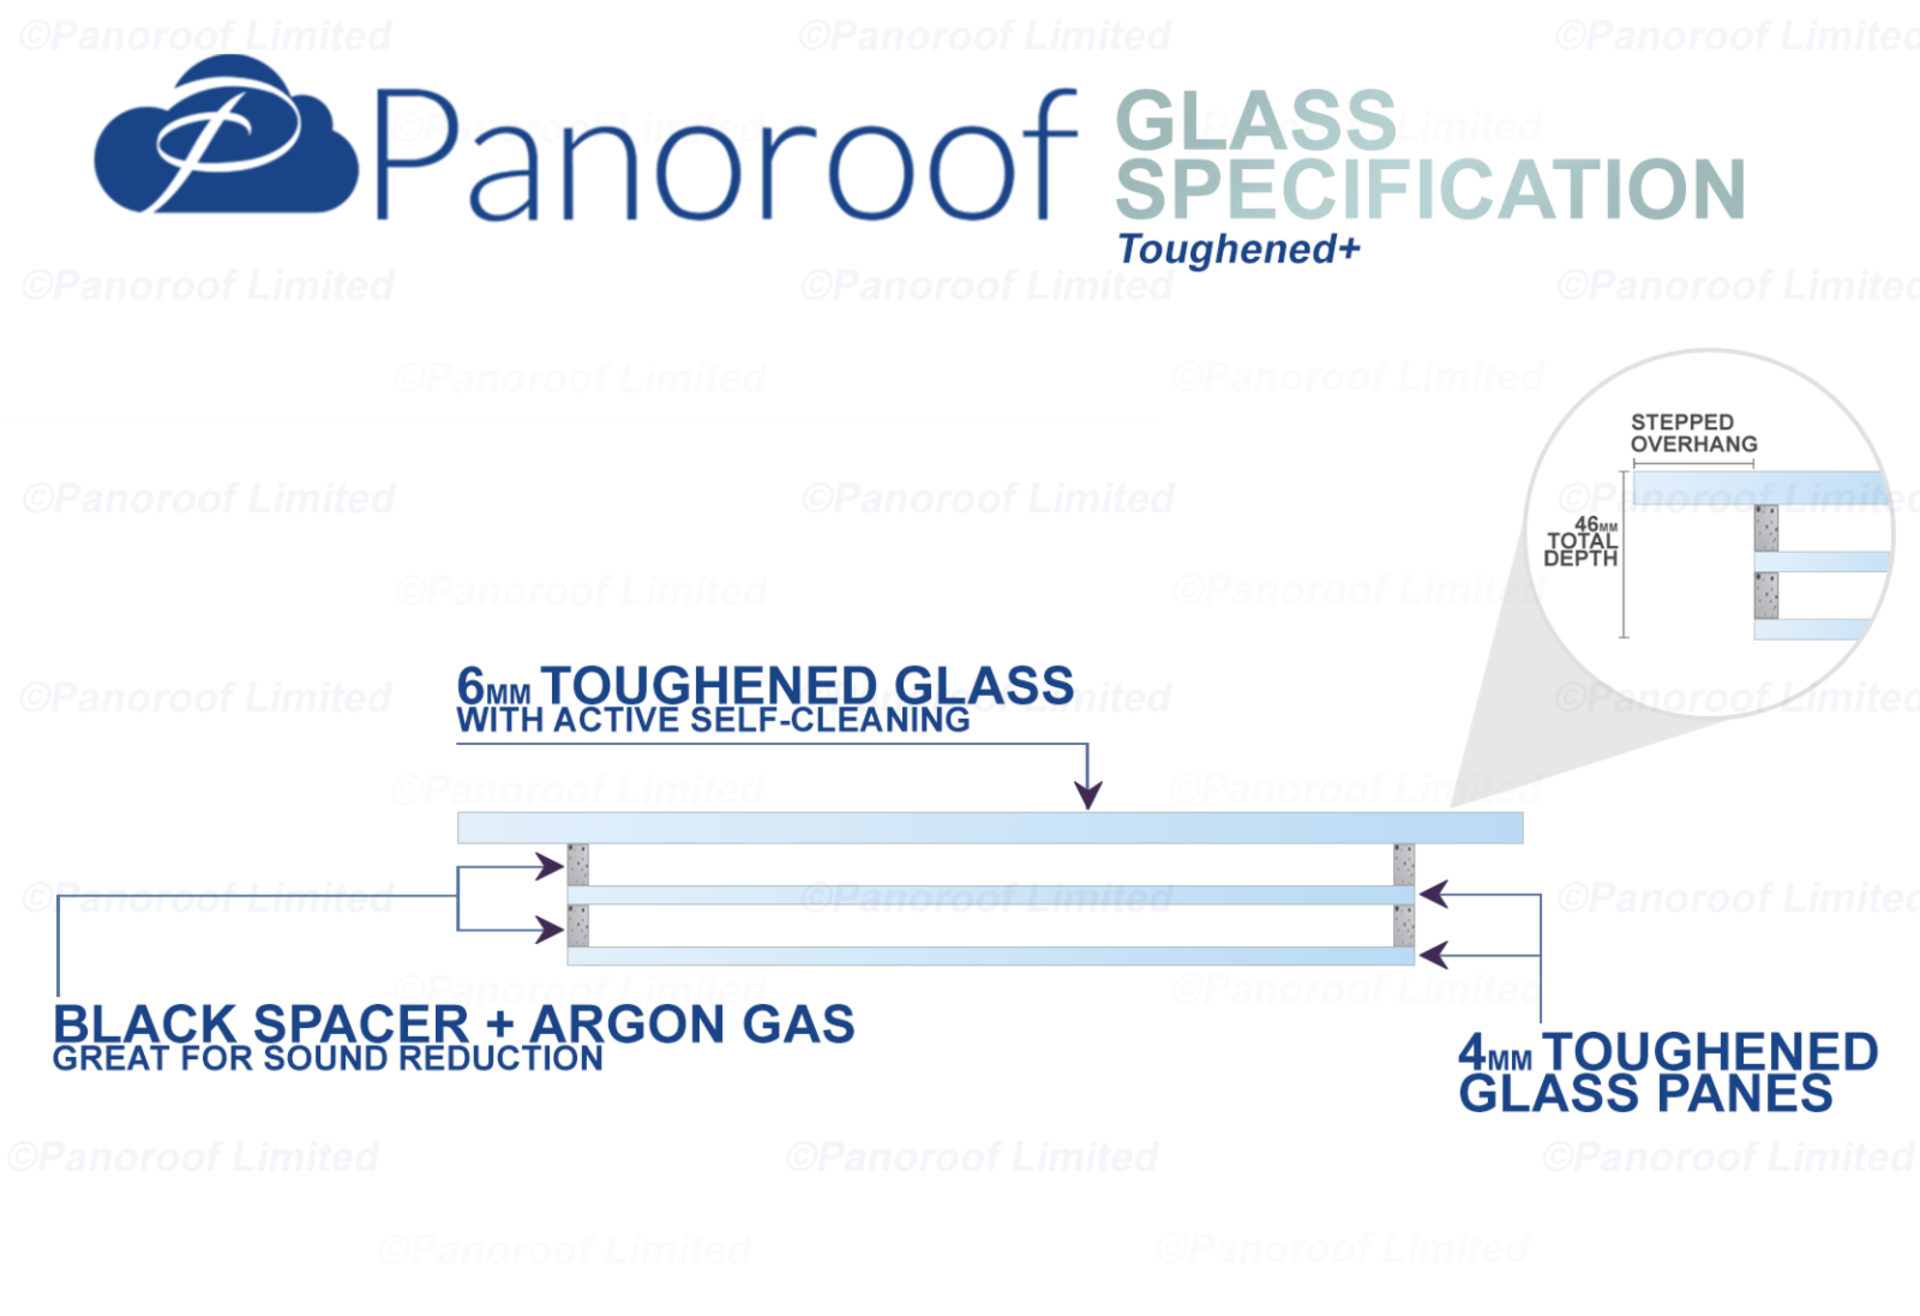 """Panoroof Triple Glazed Self Cleaning 1000x1500mm (inside Size Visable glass area) Seamless - Image 4 of 6